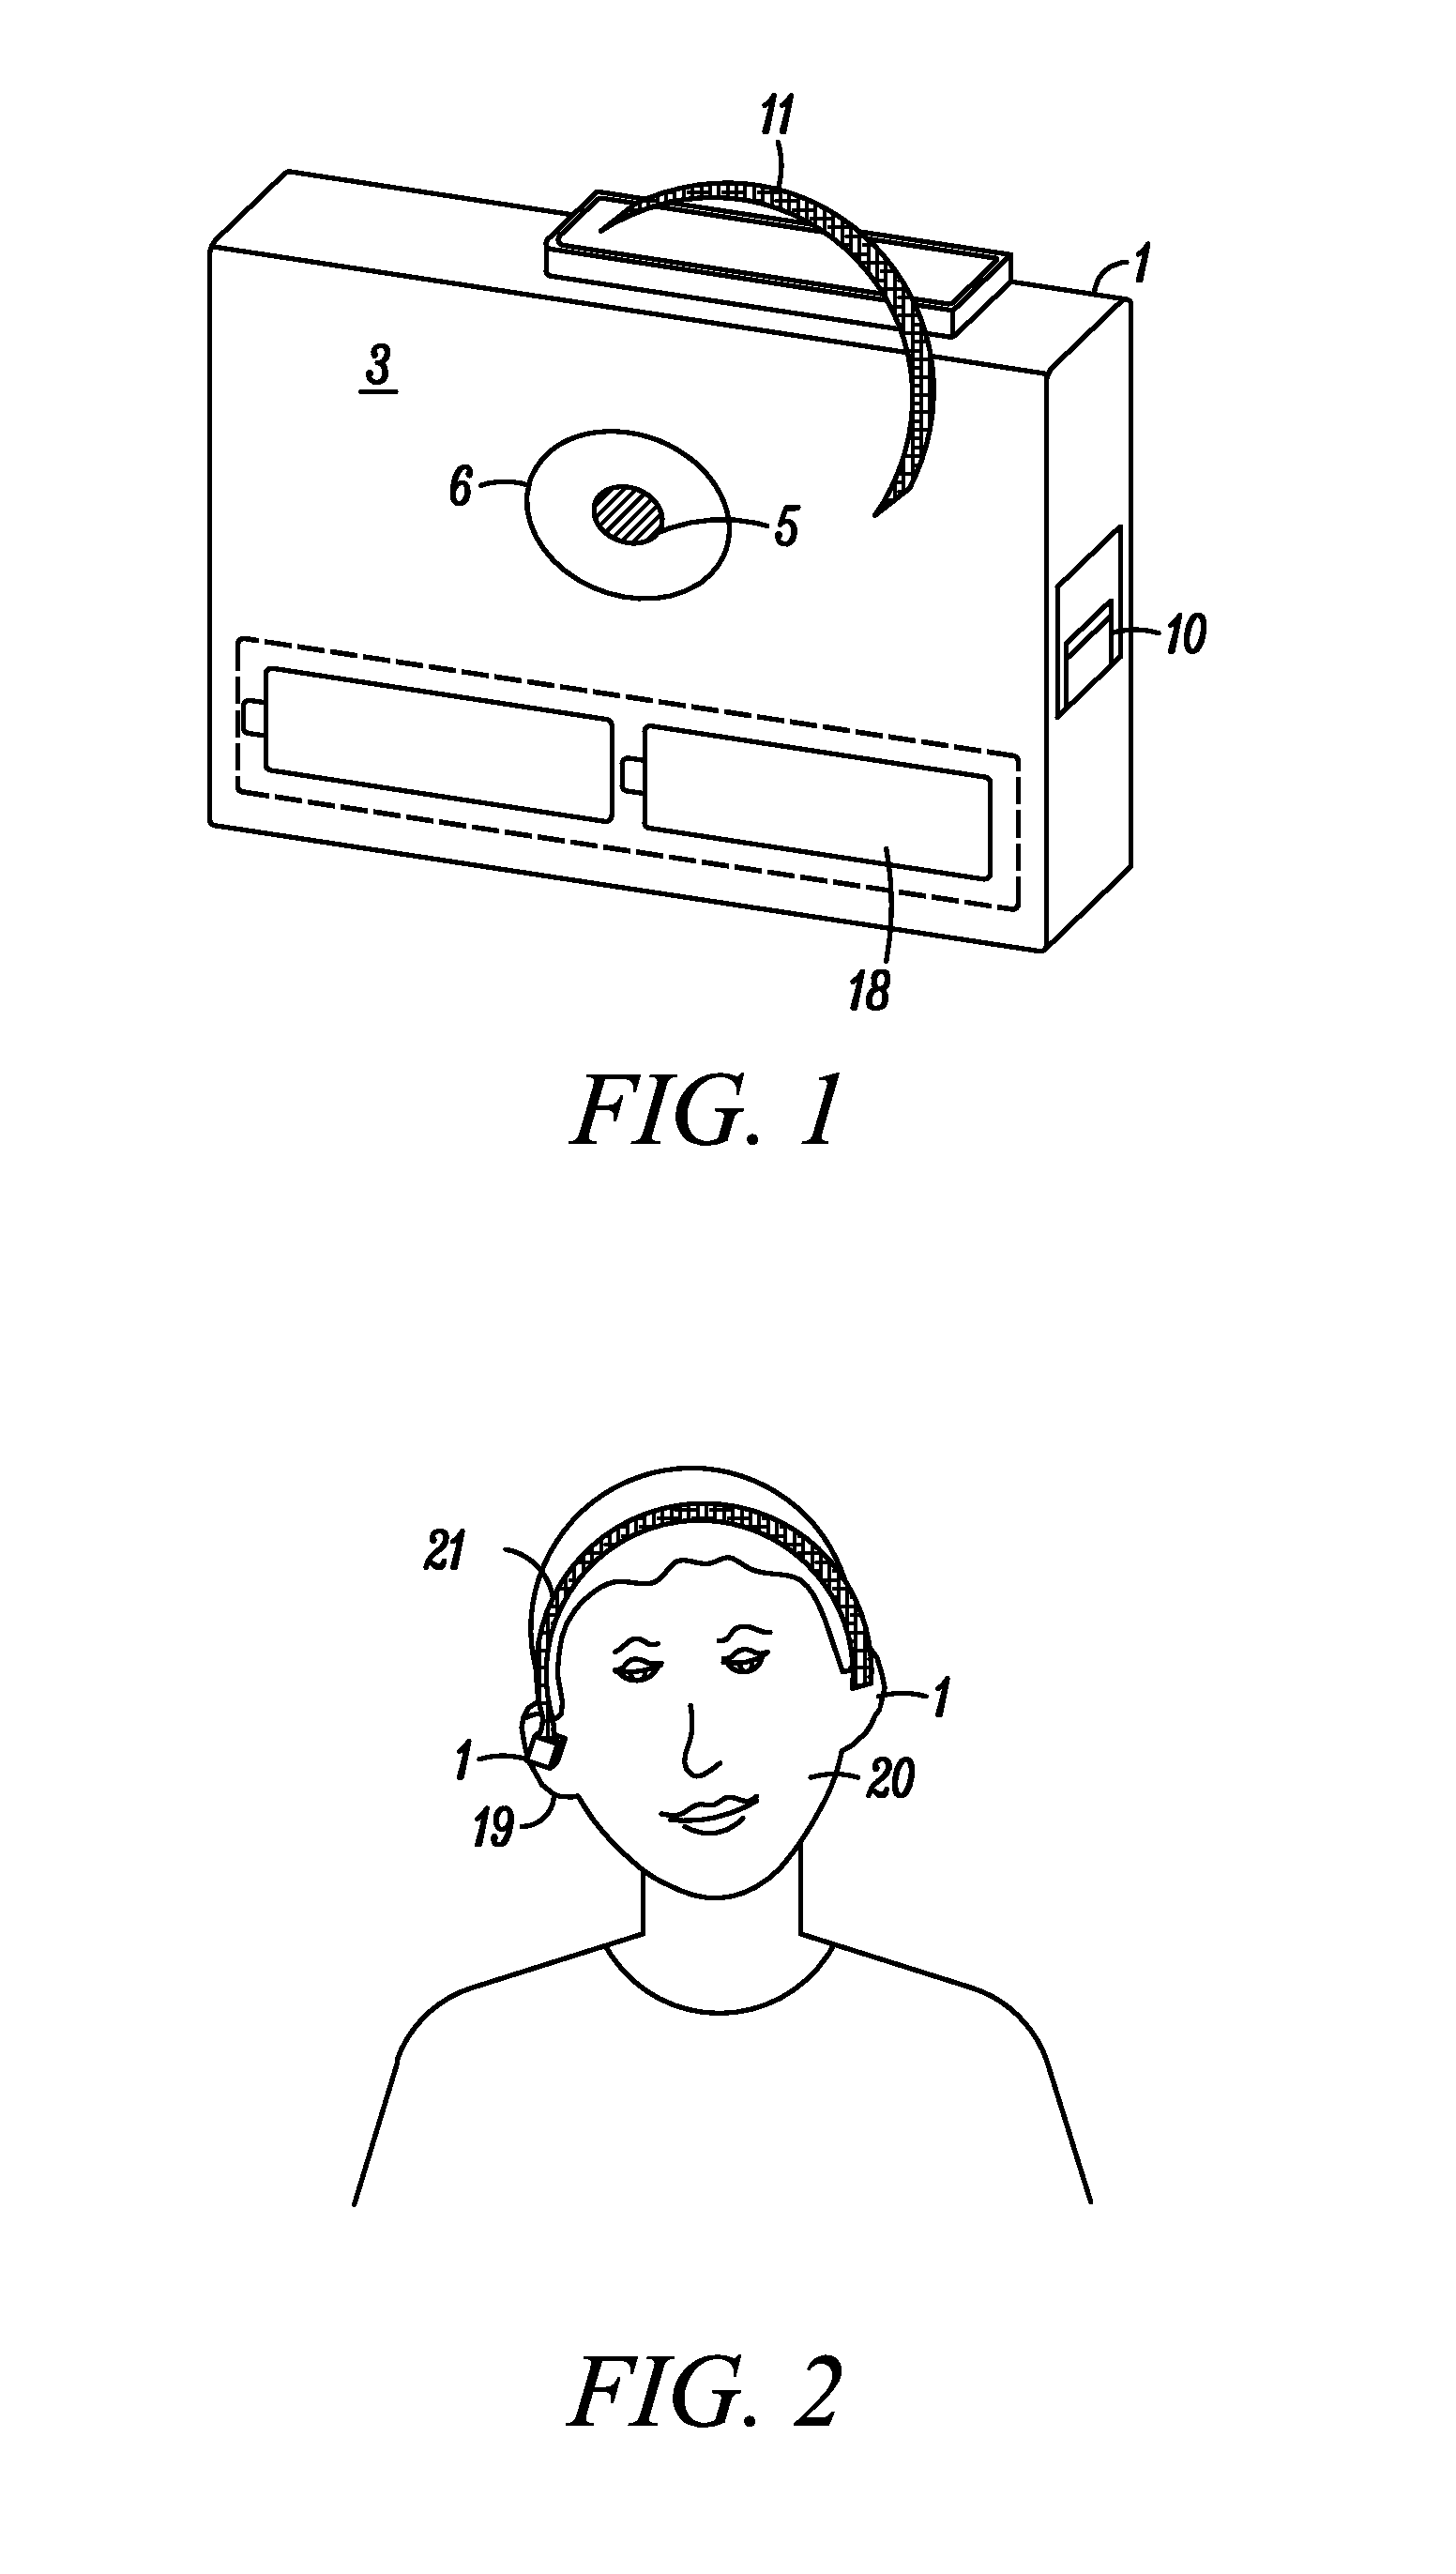 Treatment of ear infection using hands-free blue/violet light device